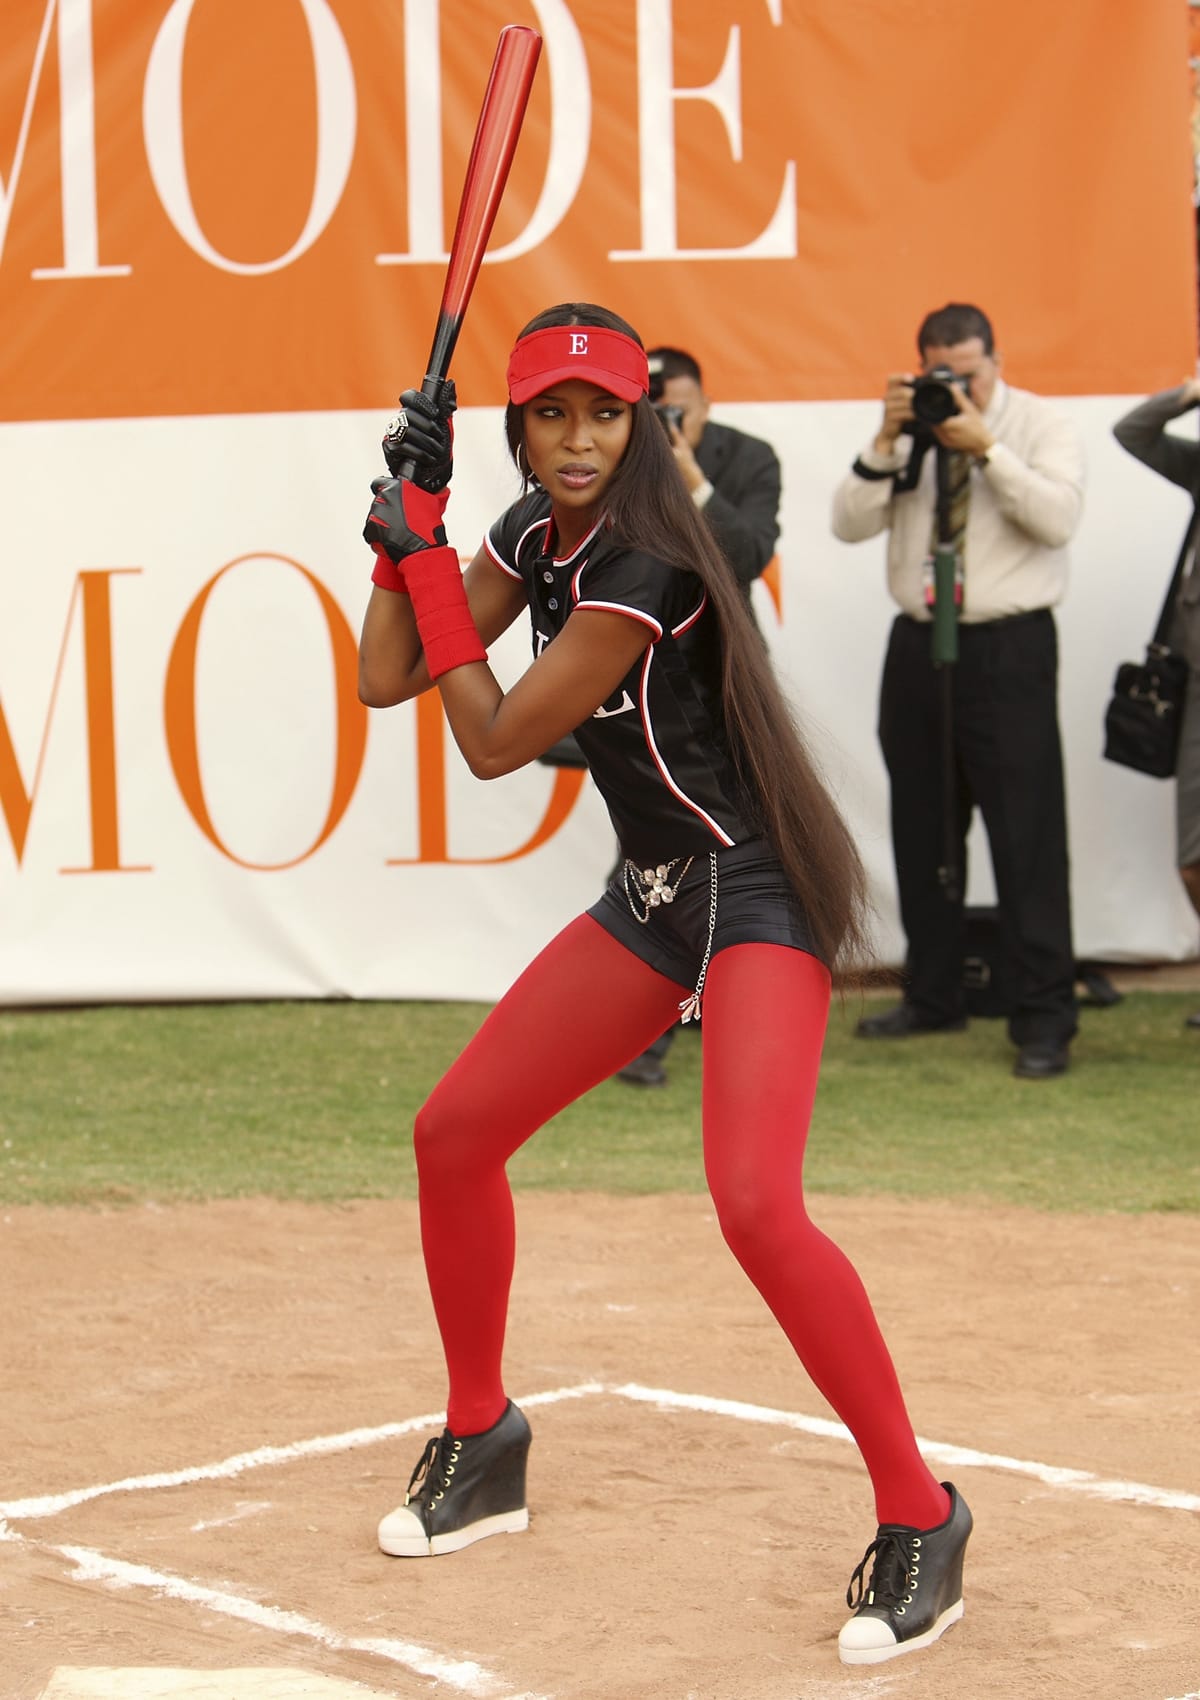 Naomi Campbell wears hotpants and bright red tights in Jump, the 18th episode in the second season of the American dramedy series Ugly Betty